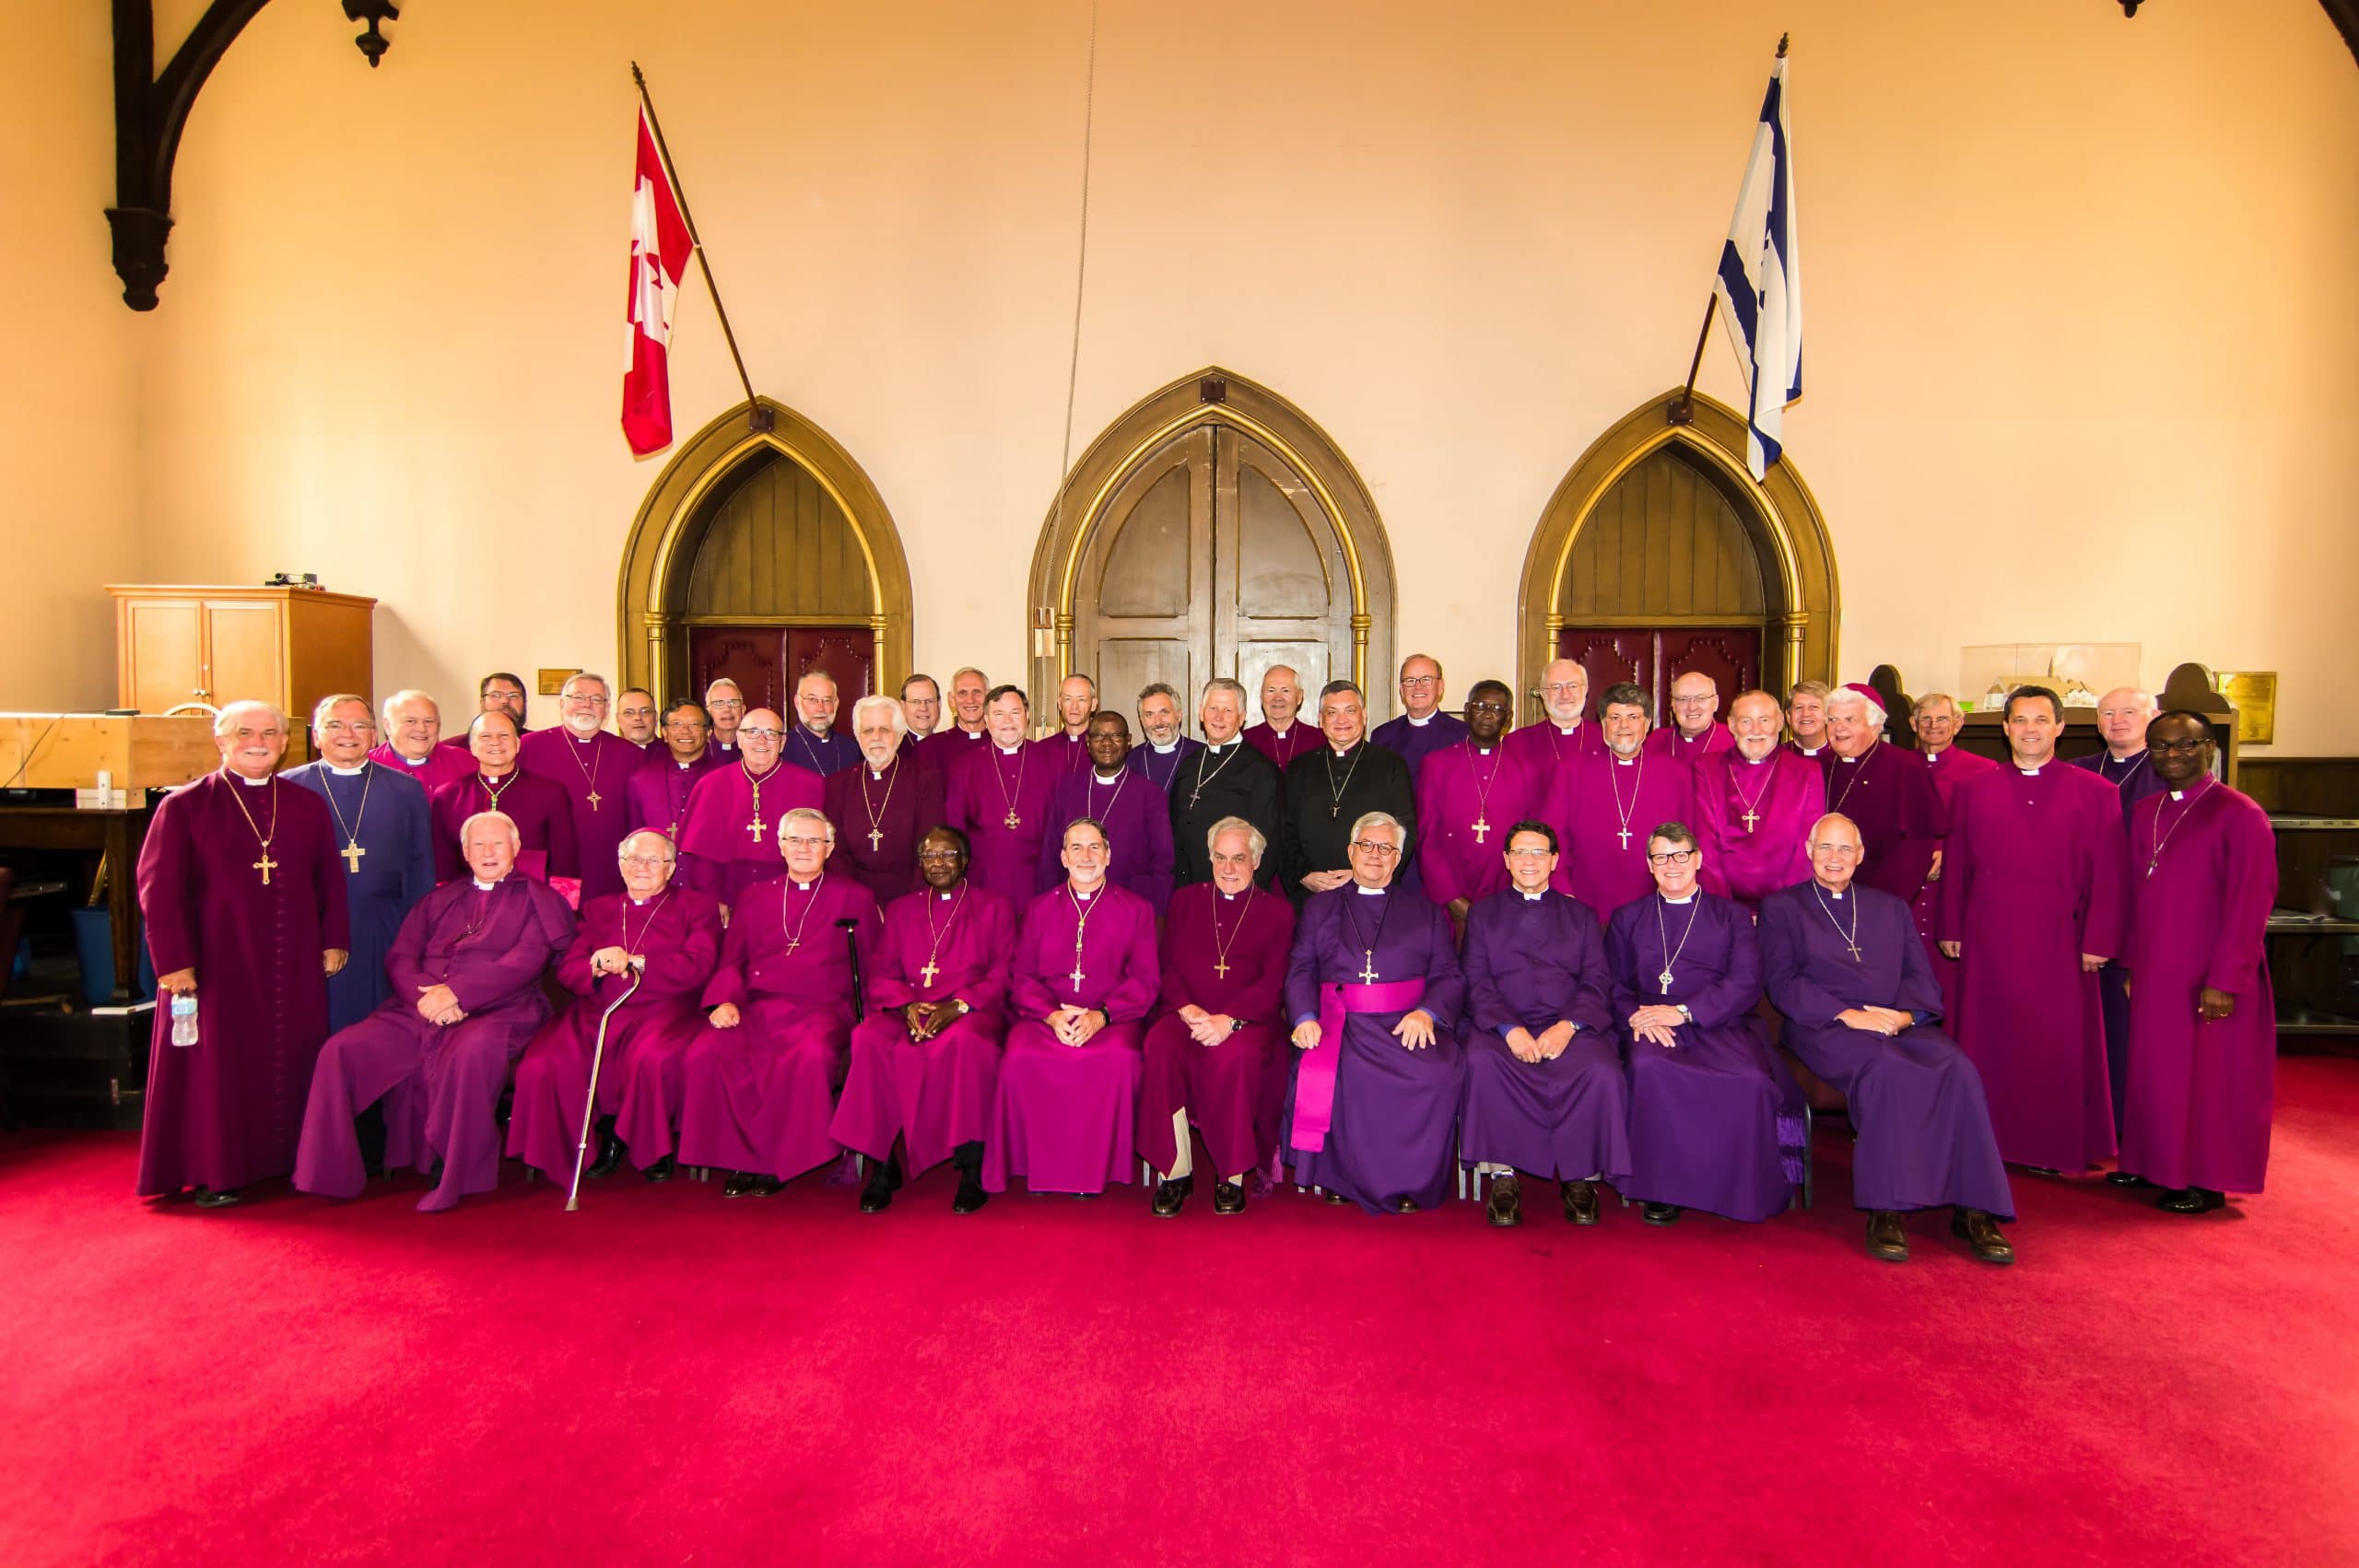 College of Bishops Statement on the Ordination of Women - The Anglican Chur...